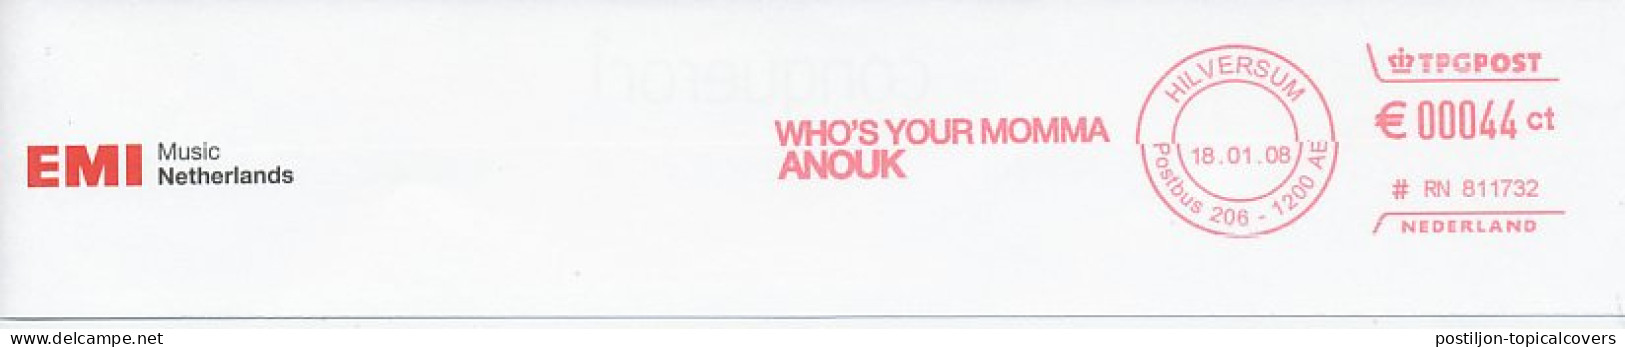 Meter Top Cut Netherlands 2008 Anouk - Album - Who S Your Momma - Musique